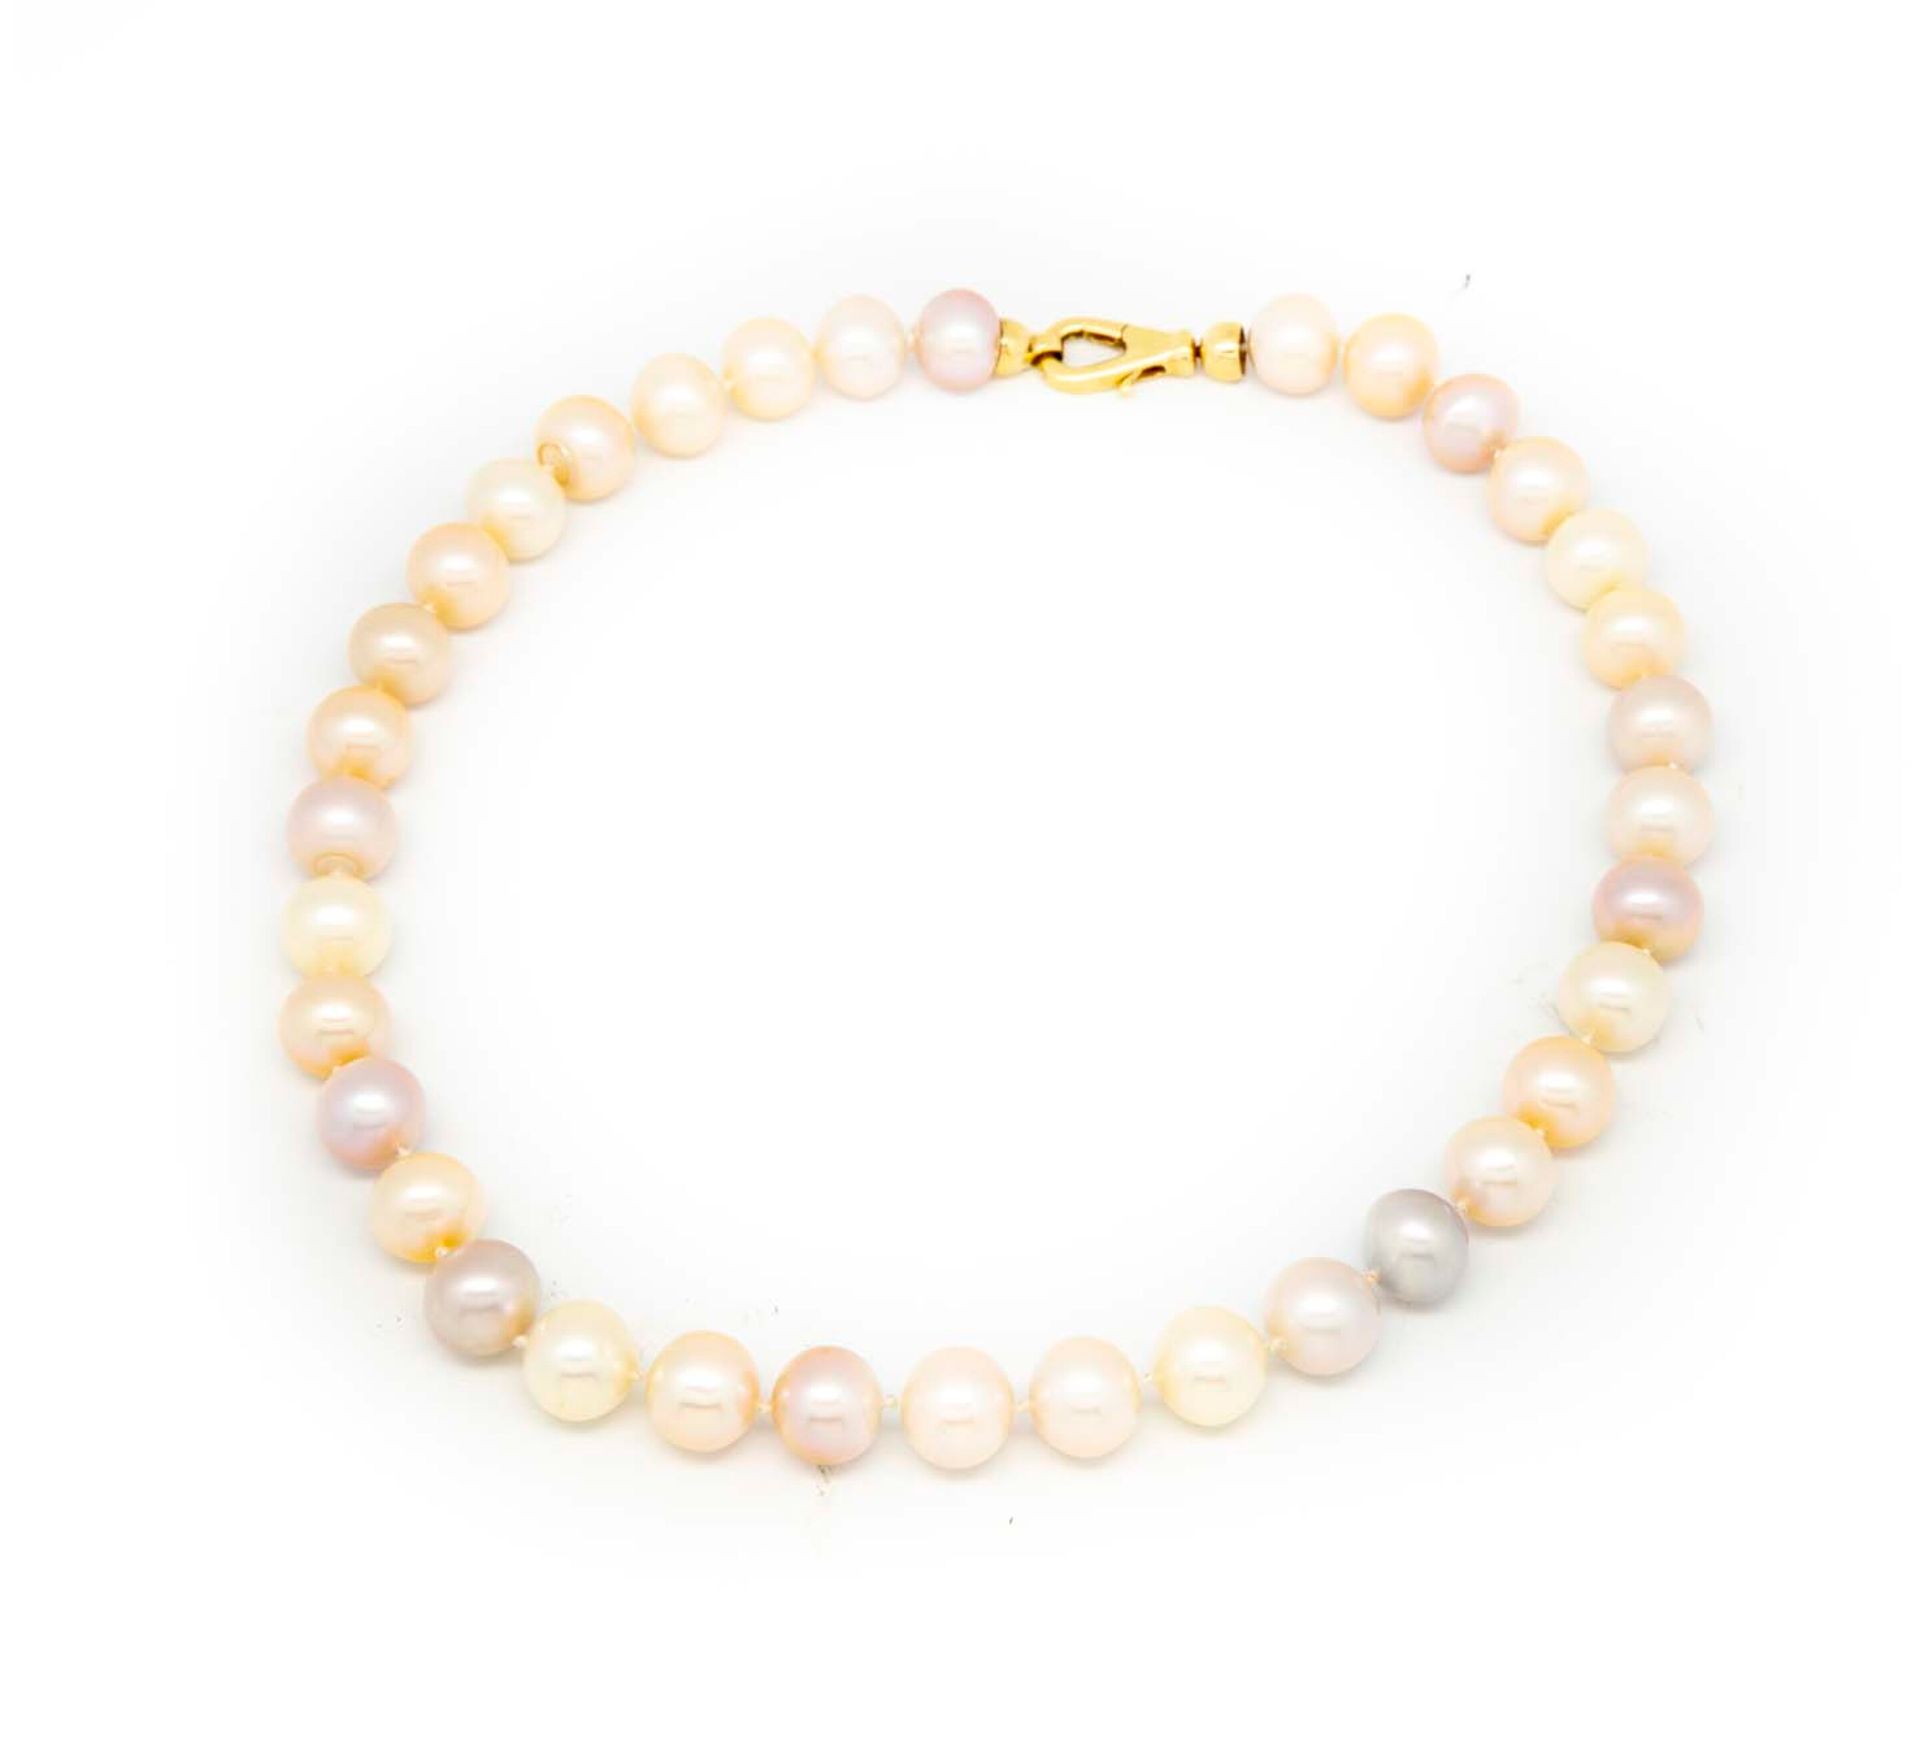 Null Necklace of 35 pink and grey river pearls, gold clasp